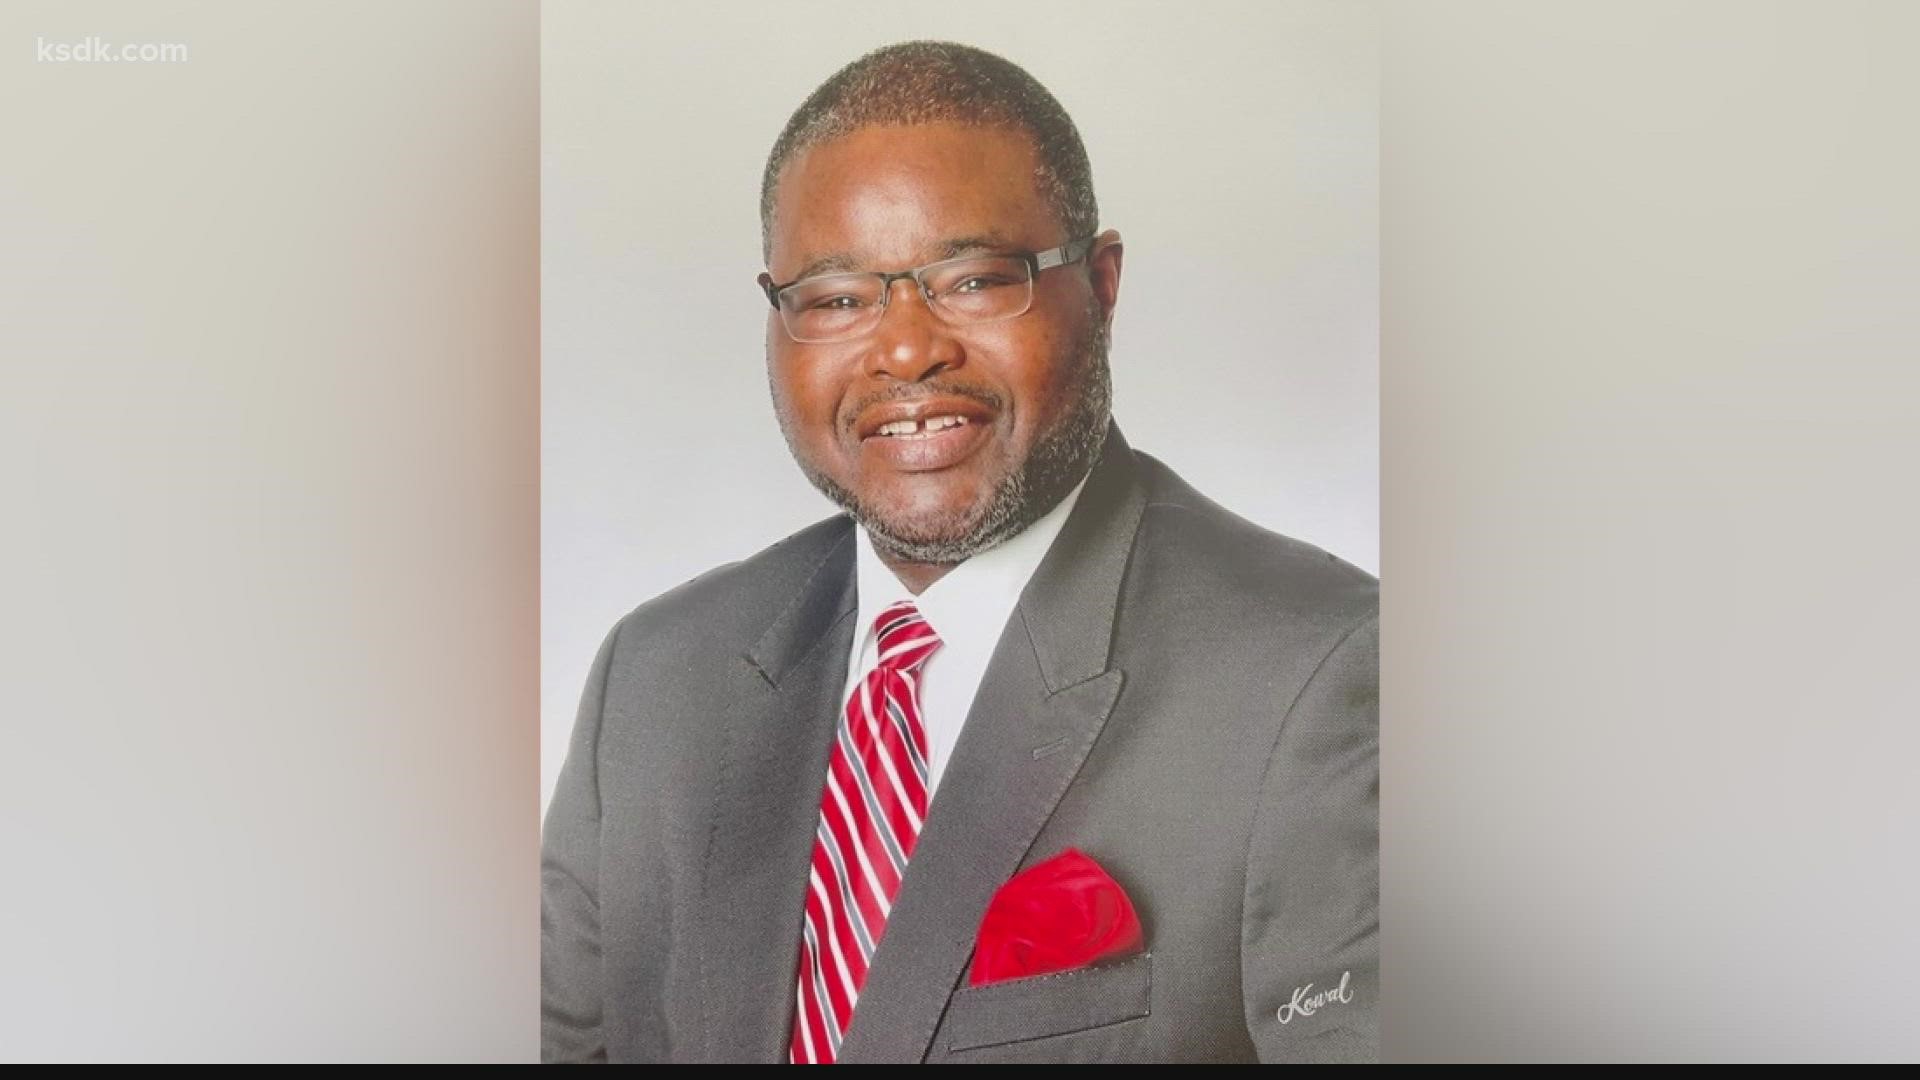 Carl Hudson, an assistant principal at Marquette High School, died Wednesday after an extended illness, a letter to students said.